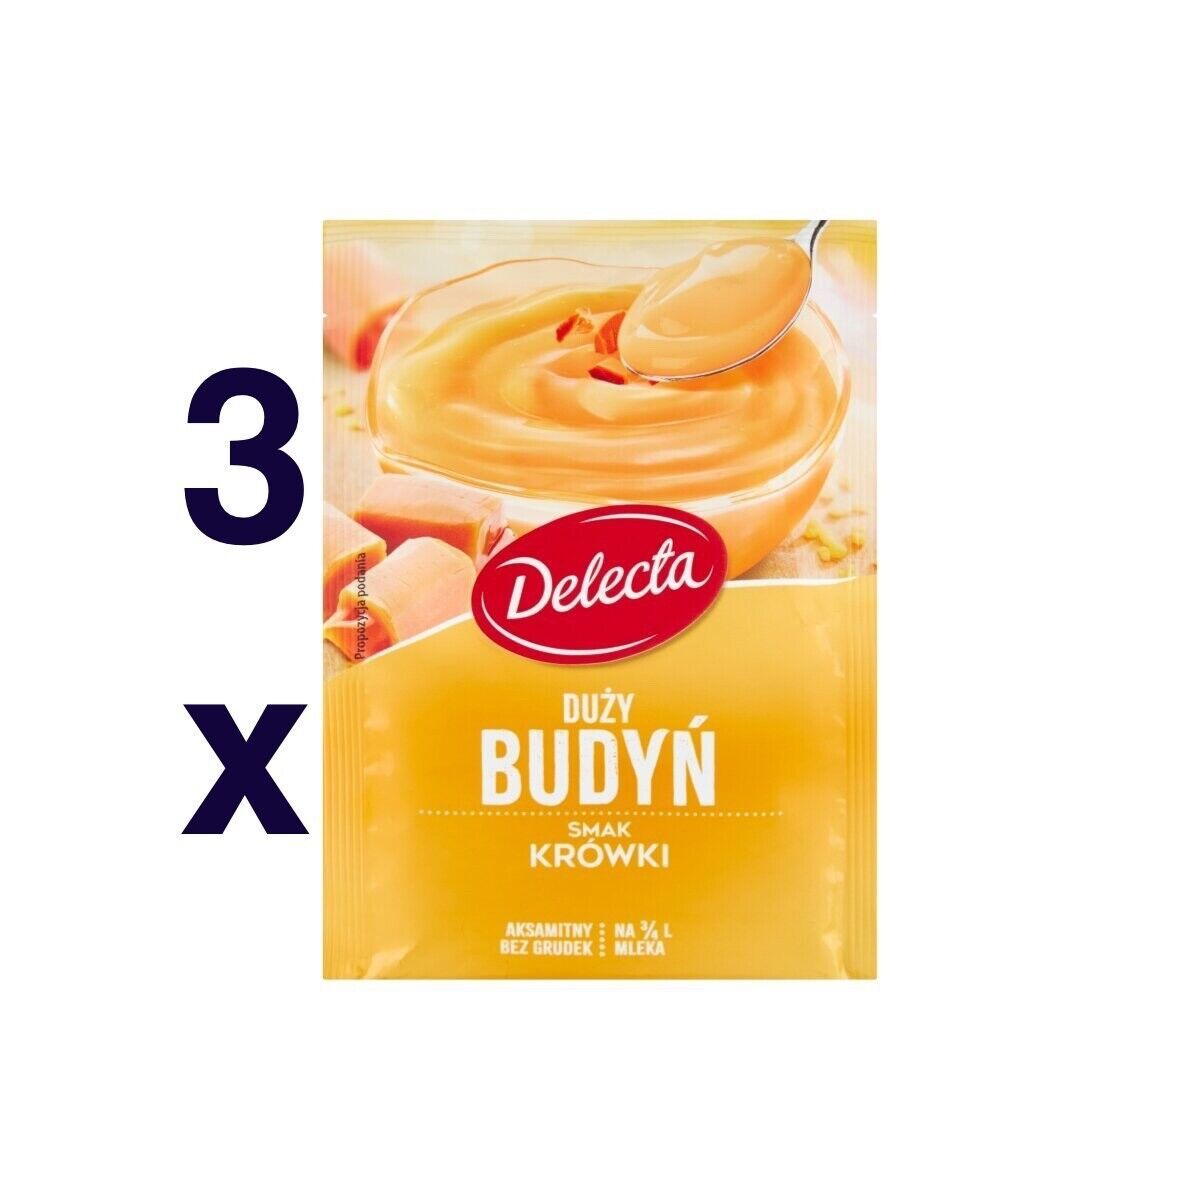 Primary image for DELECTA Budyn Family Size Pudding KROWKA Milk fudge flavor 3pc- FREE SHIPPING